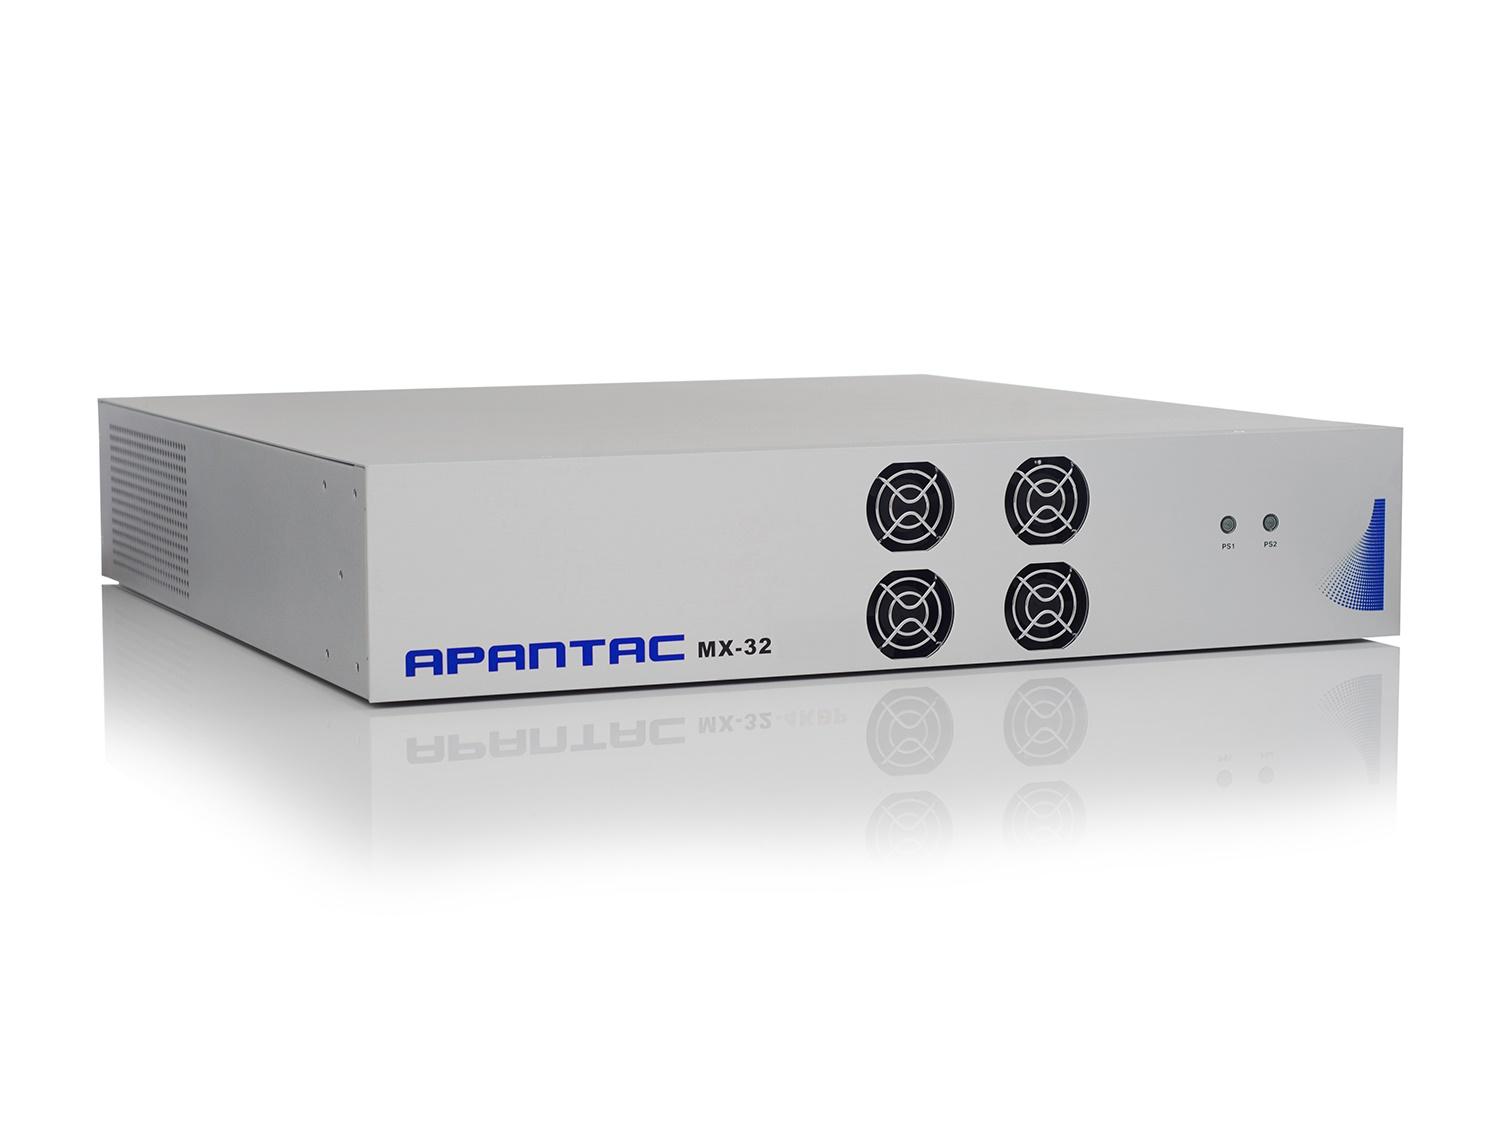 Mx-32 Cost-Effective 32x4 Video Multiviewer by Apantac